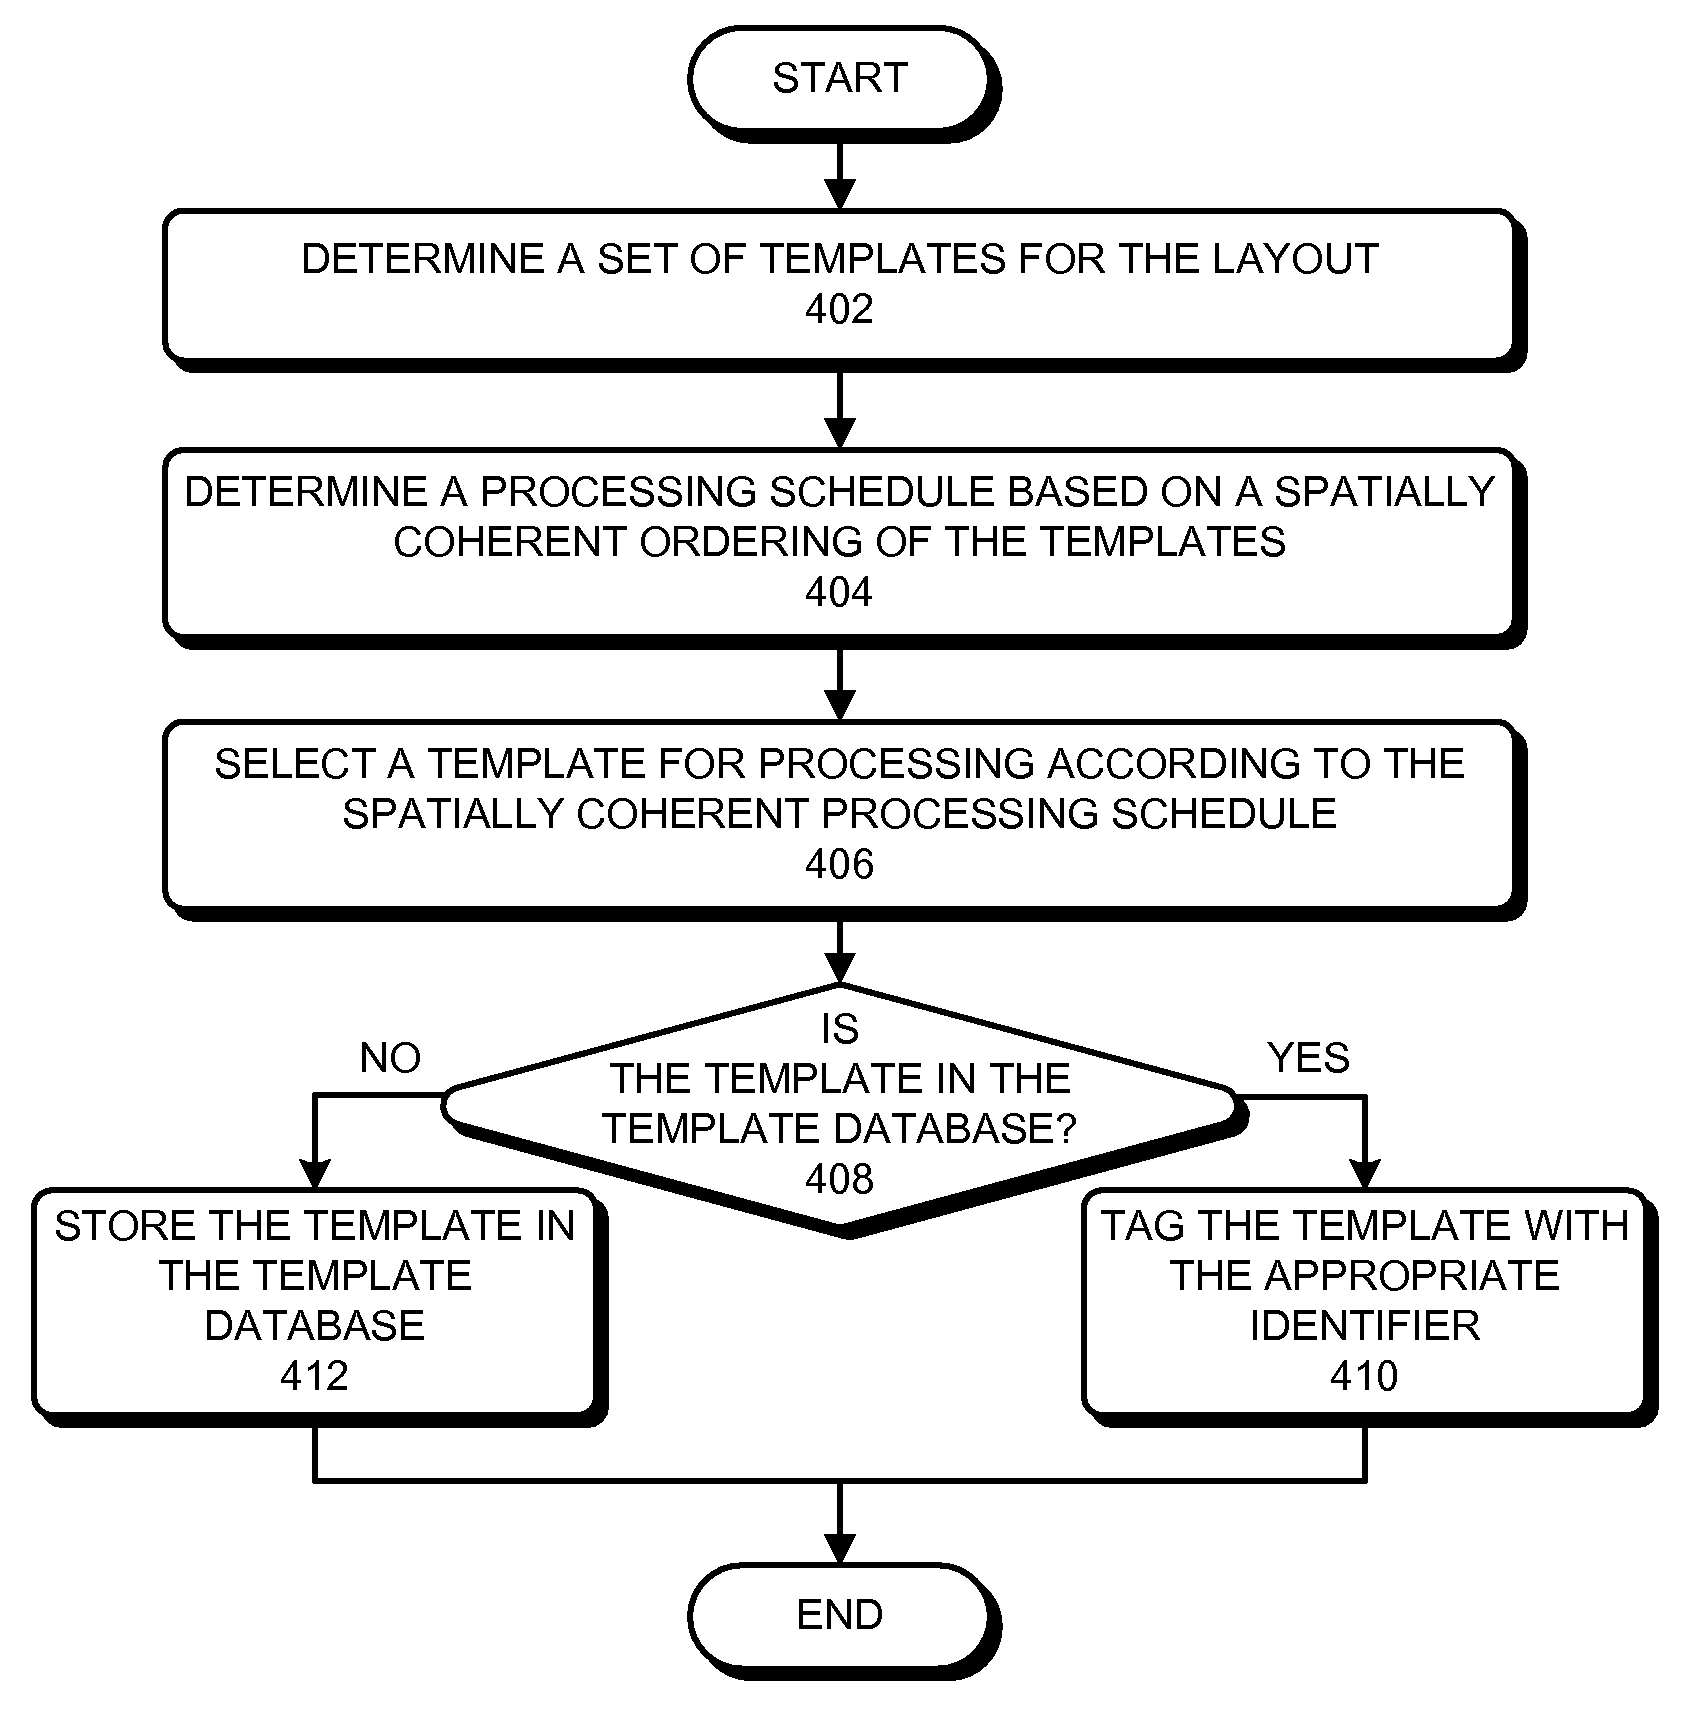 Incremental concurrent processing for efficient computation of high-volume layout data